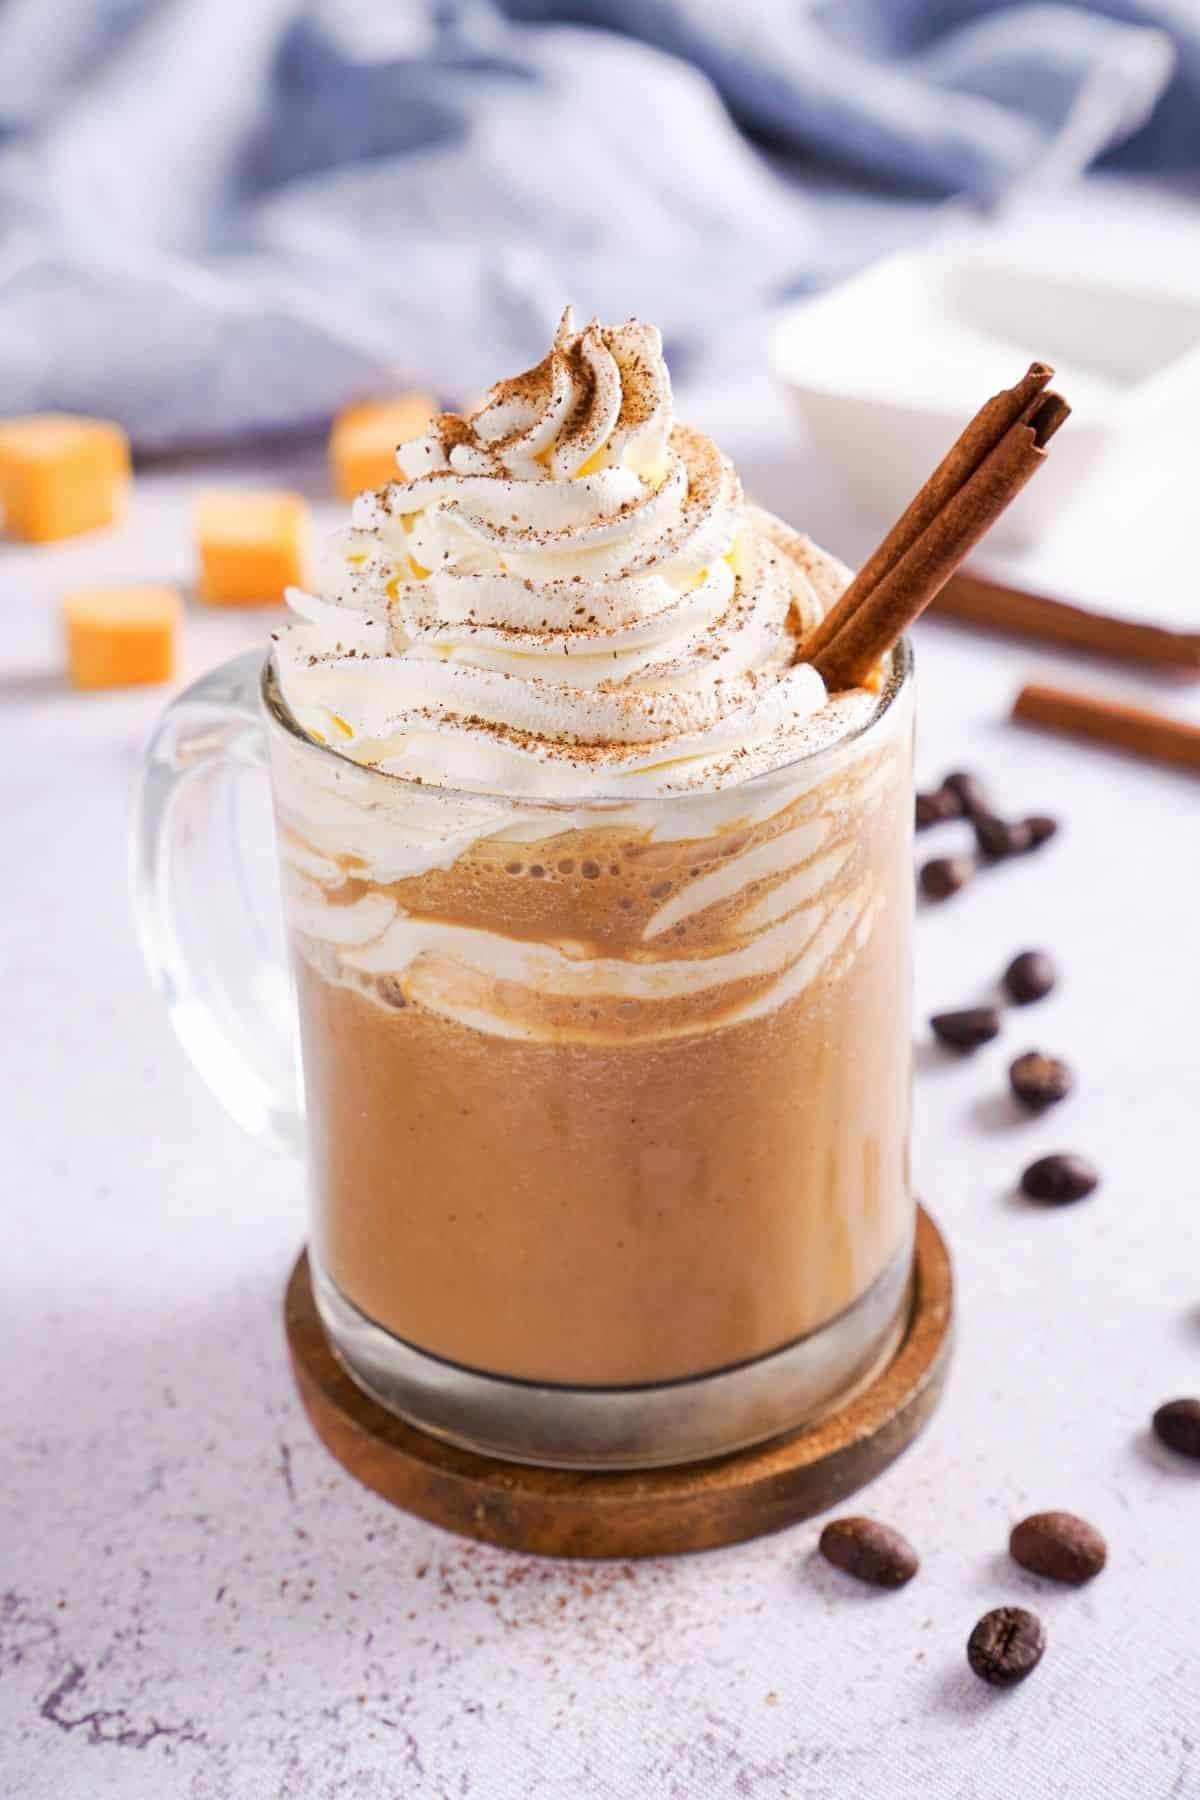 Keto Pumpkin Spice Latte topped with whipped cream and cinnamon sticks